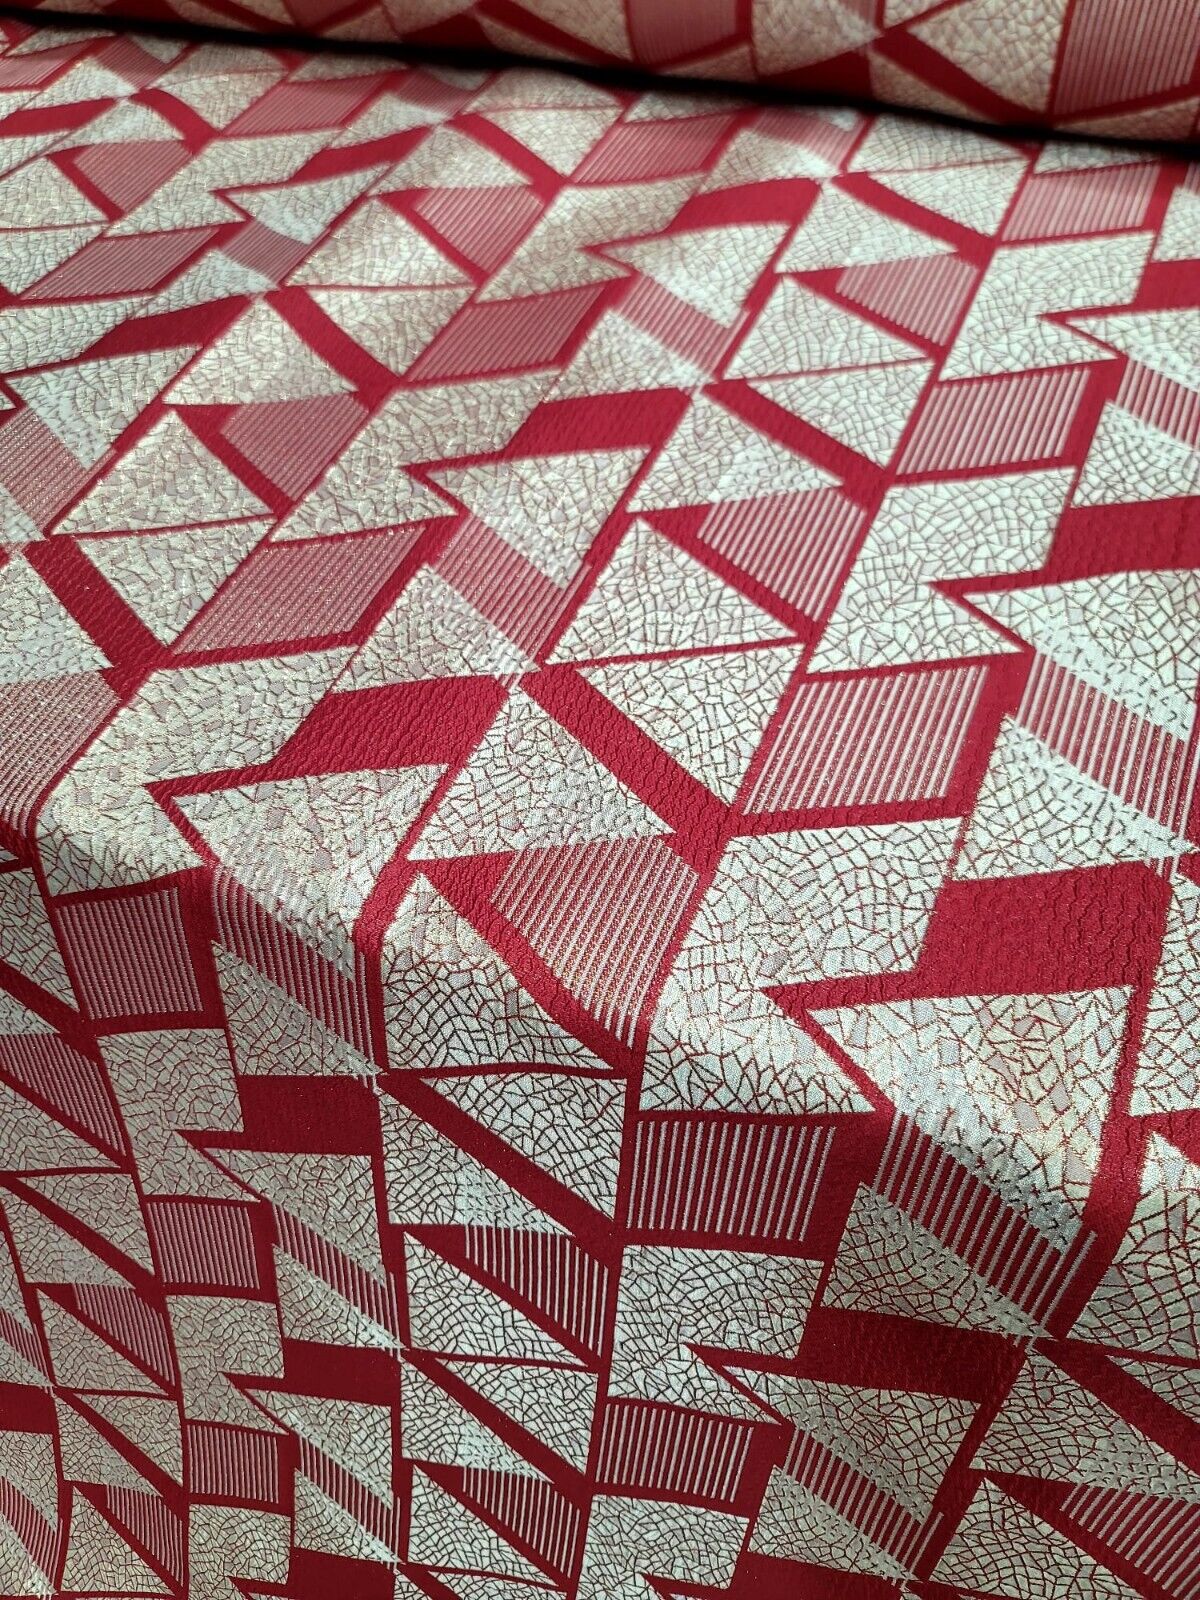 Red and Gold Metallic Geometric Brocade Fabric - 57" Width - Sold by Yard - Ideal for High-End Creations, Dressmaking, and Home Decor